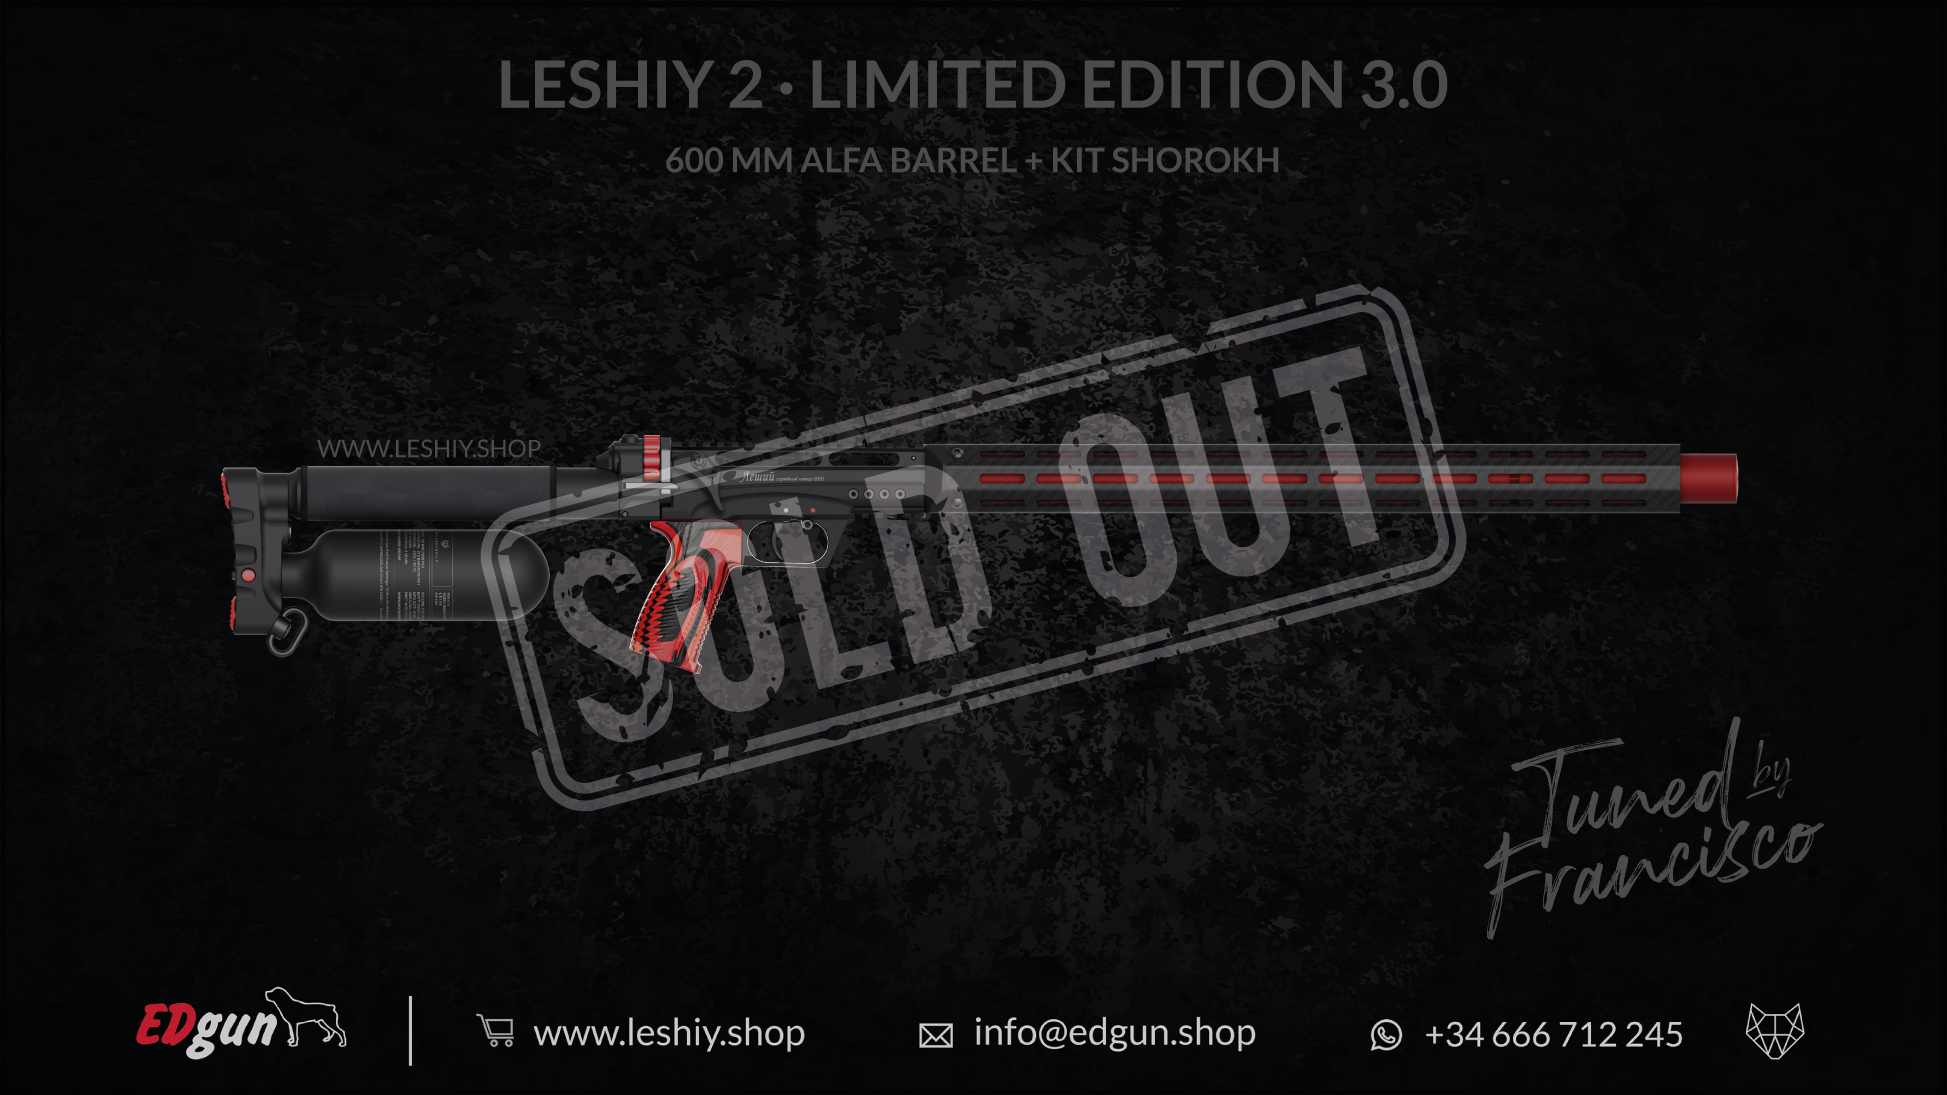 Leshiy 2 Limited Edition 3.0 Tuned by Francisco